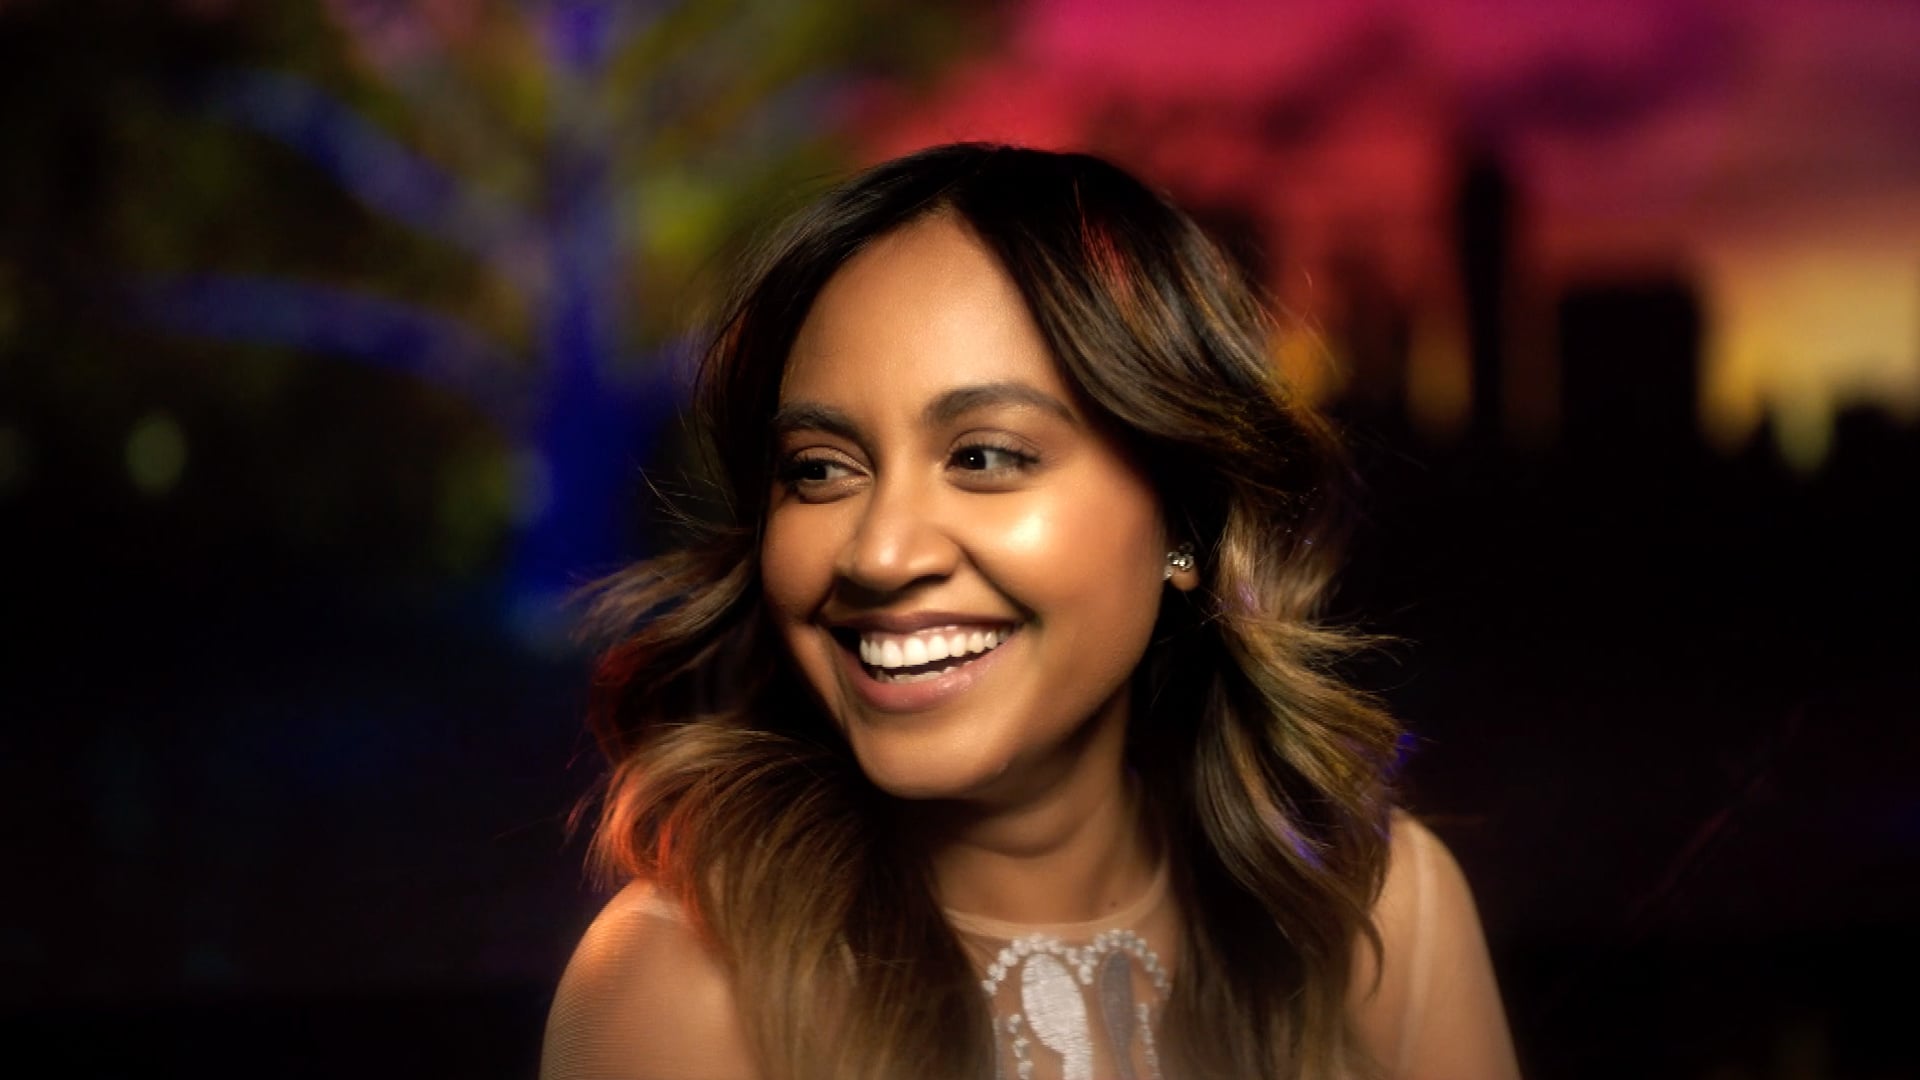 Jessica Mauboy Music Video (no audio due to copyright restrictions)